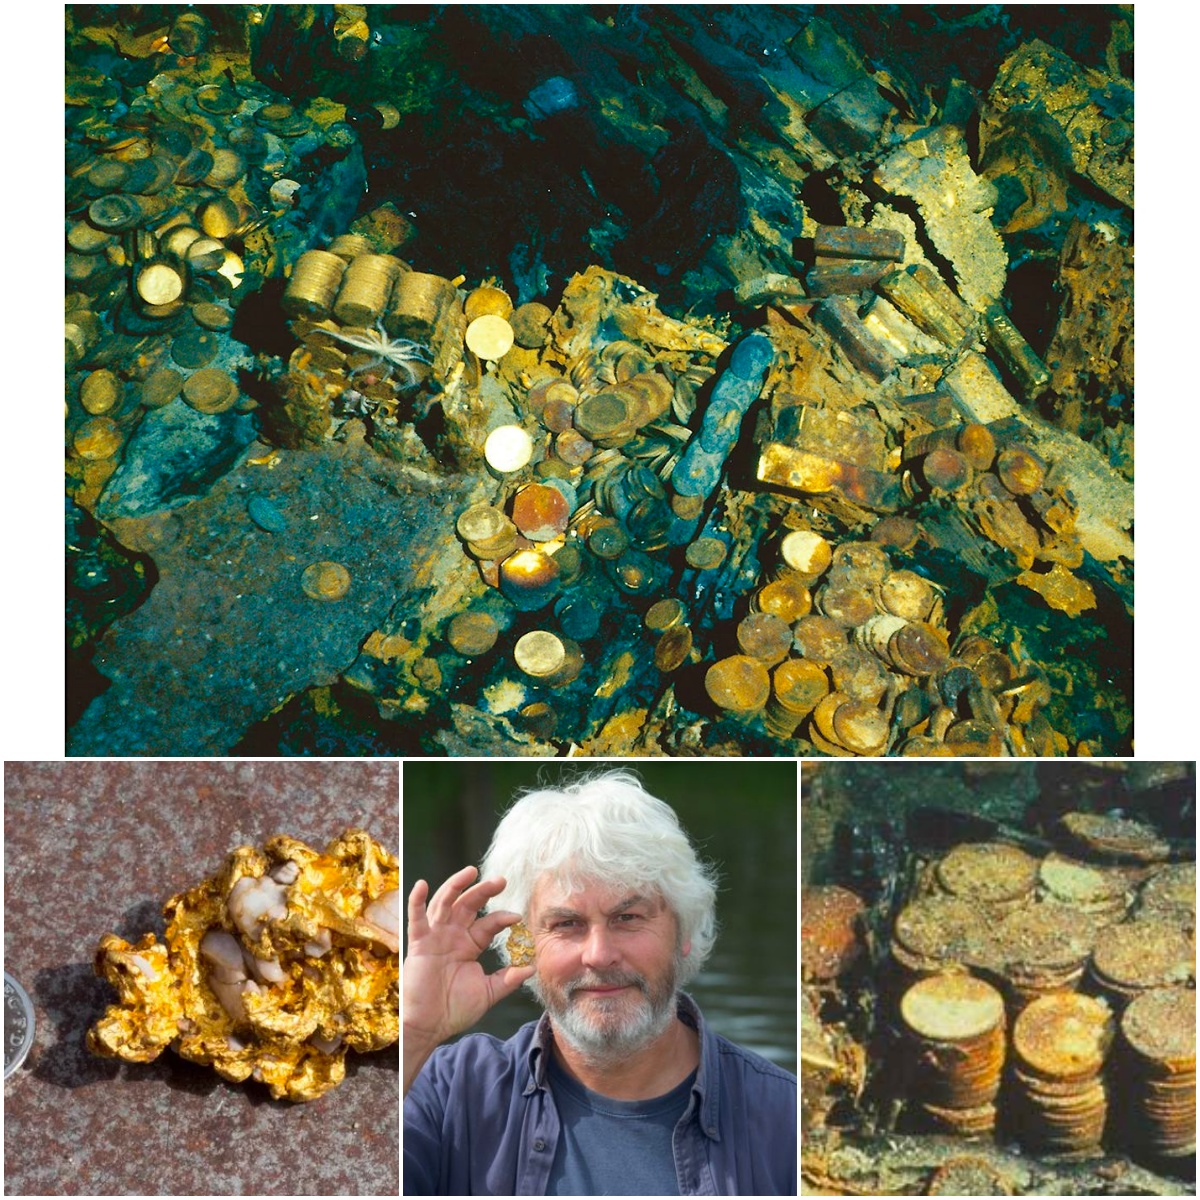 Lucky man discovers a nugget of gold the size of a chicken egg, revealing the location of a treasure lost after a shipwreck 200 years ago